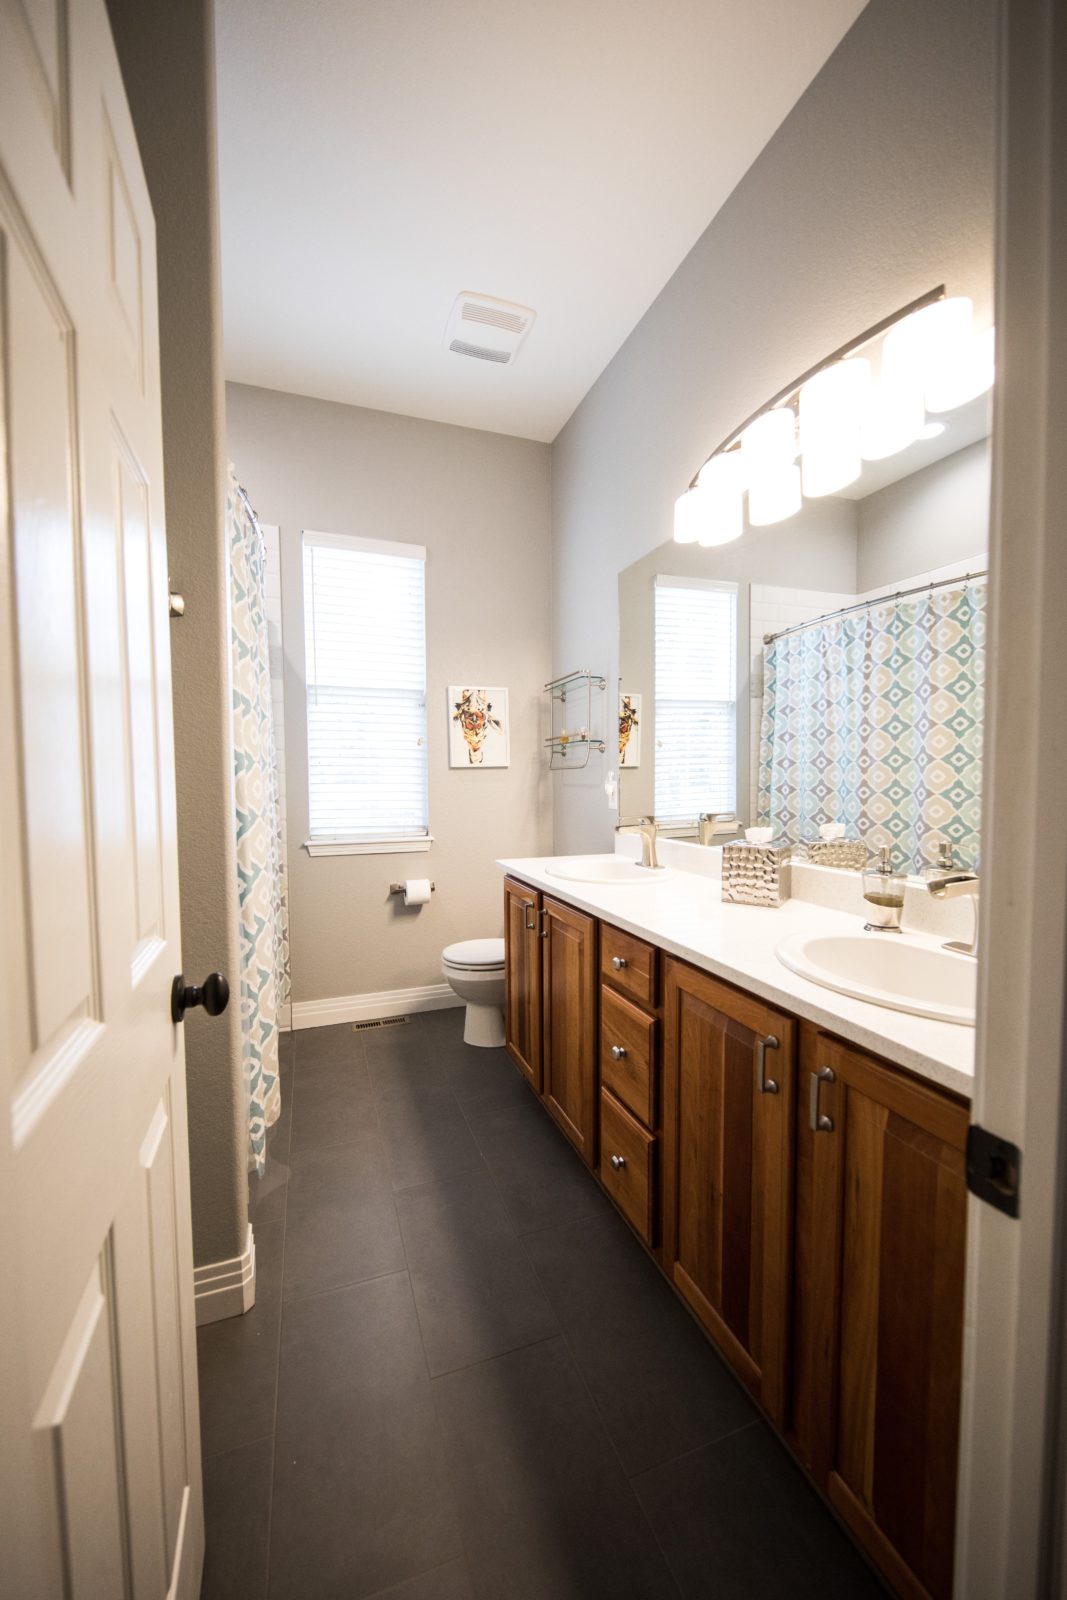 Learn about the top three do’s and don’ts of a bathroom remodel.